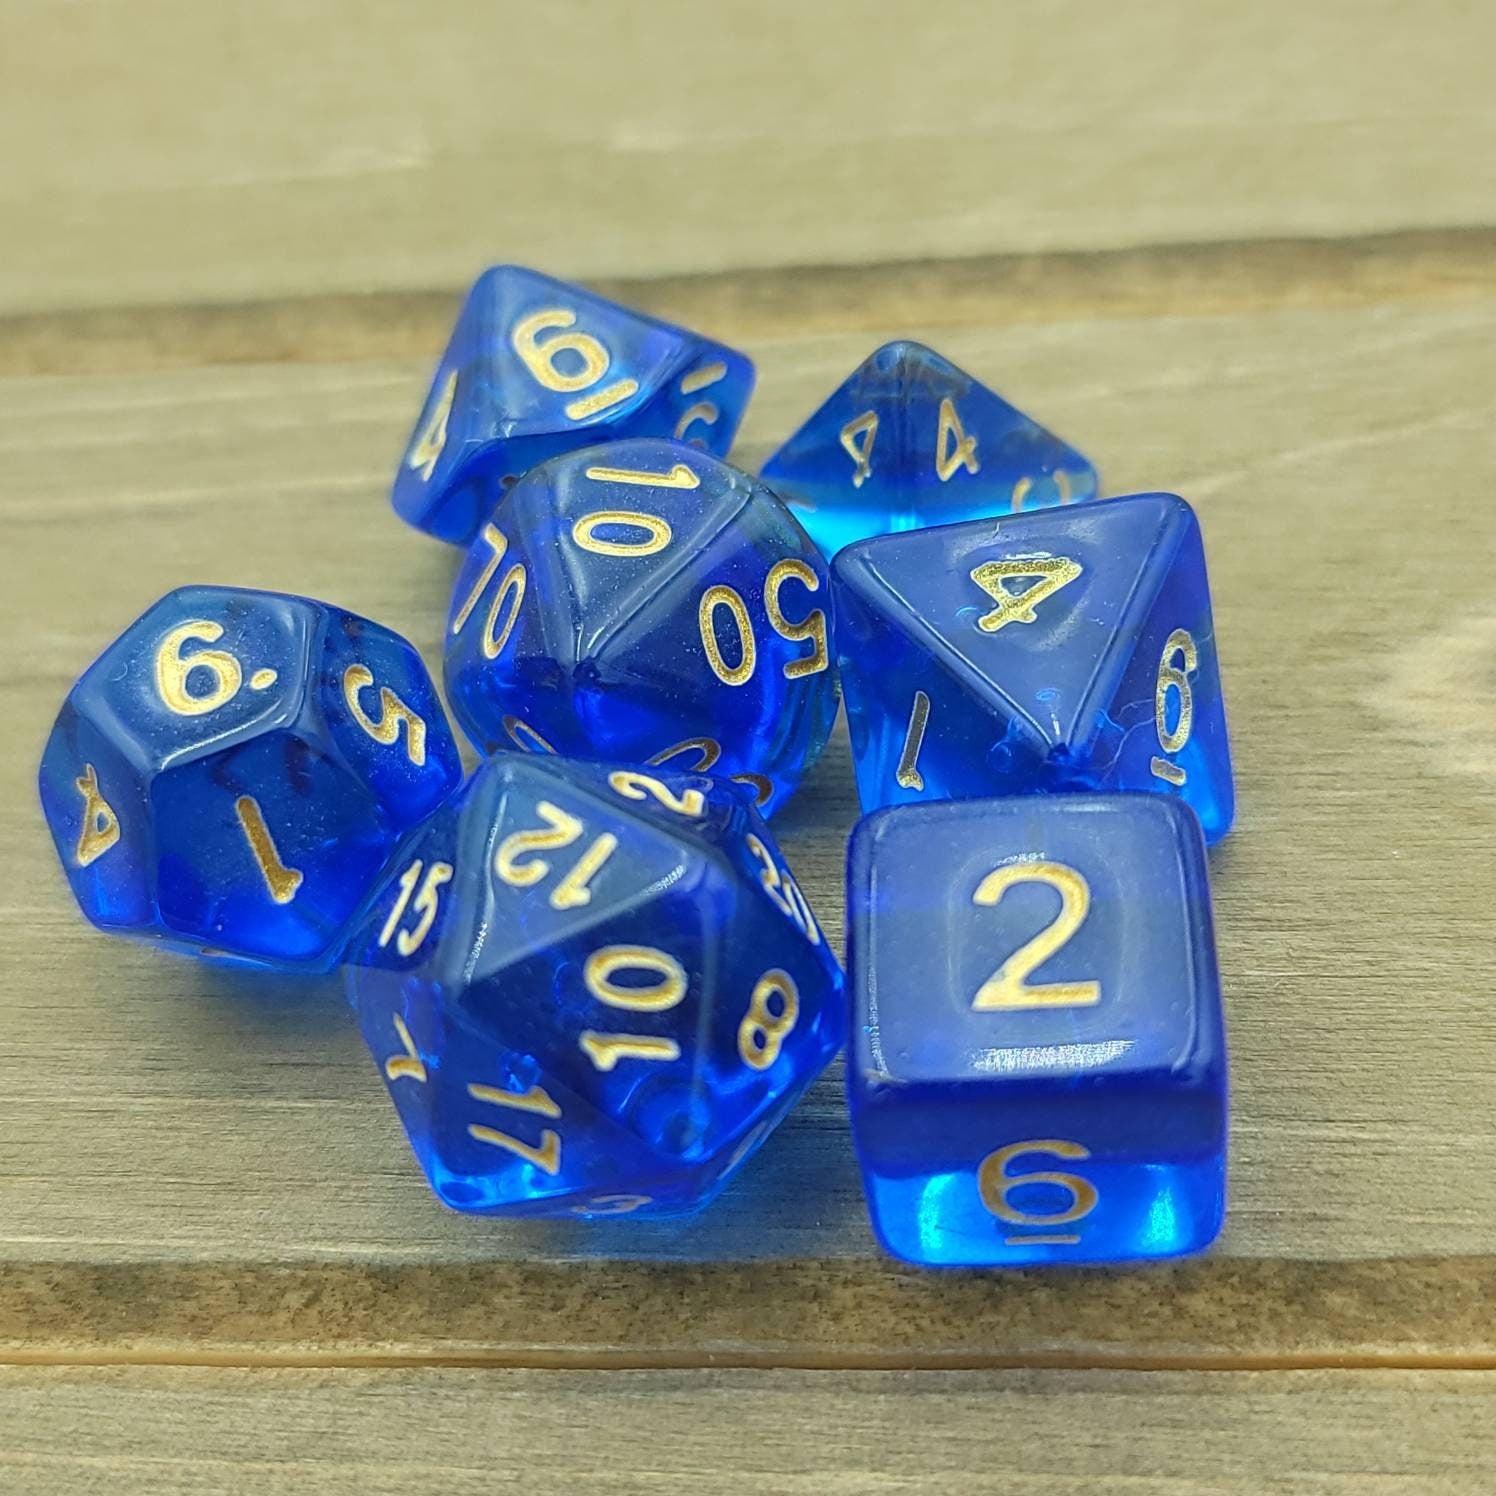 Wizards Sapphire | RPG Dice Set| RPG Dice | Polyhedral Dice Set | Dungeons and Dragons | DnD Dice Set | Gaming Dice Set